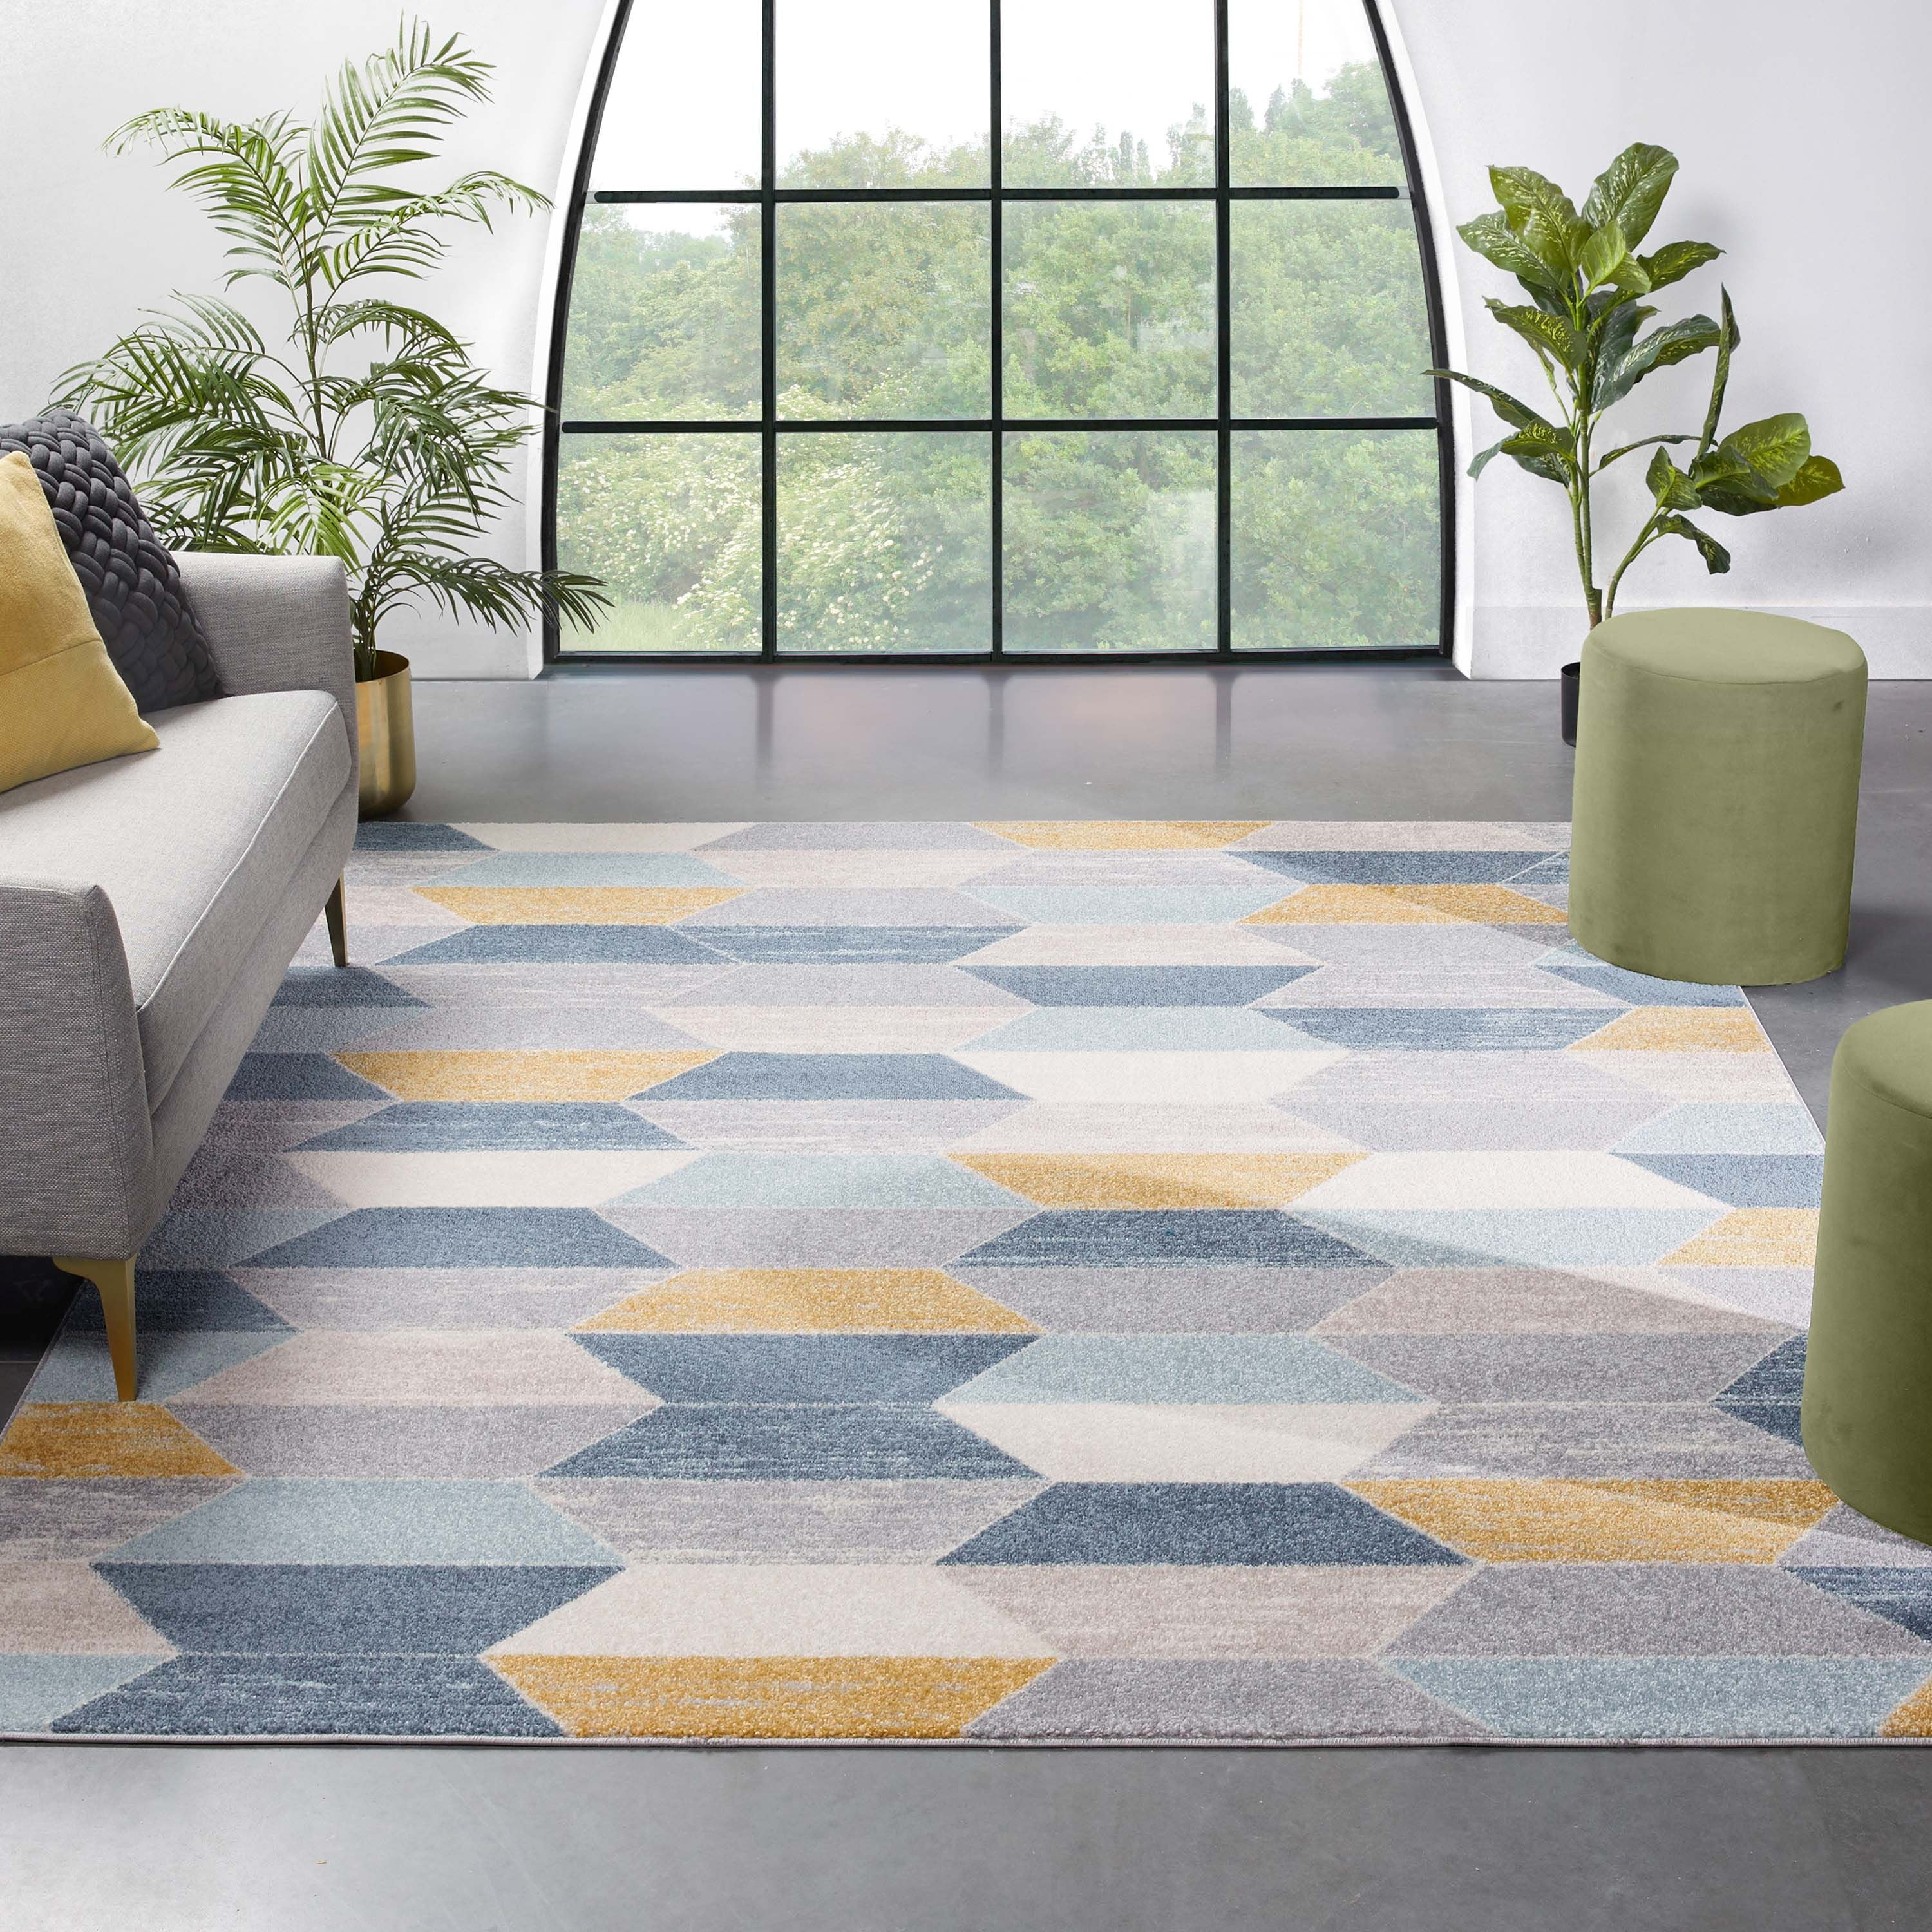 Stunning Ochre Abstract Rugs Distressed Look Mat UK Buy Online Area Rug Budget 